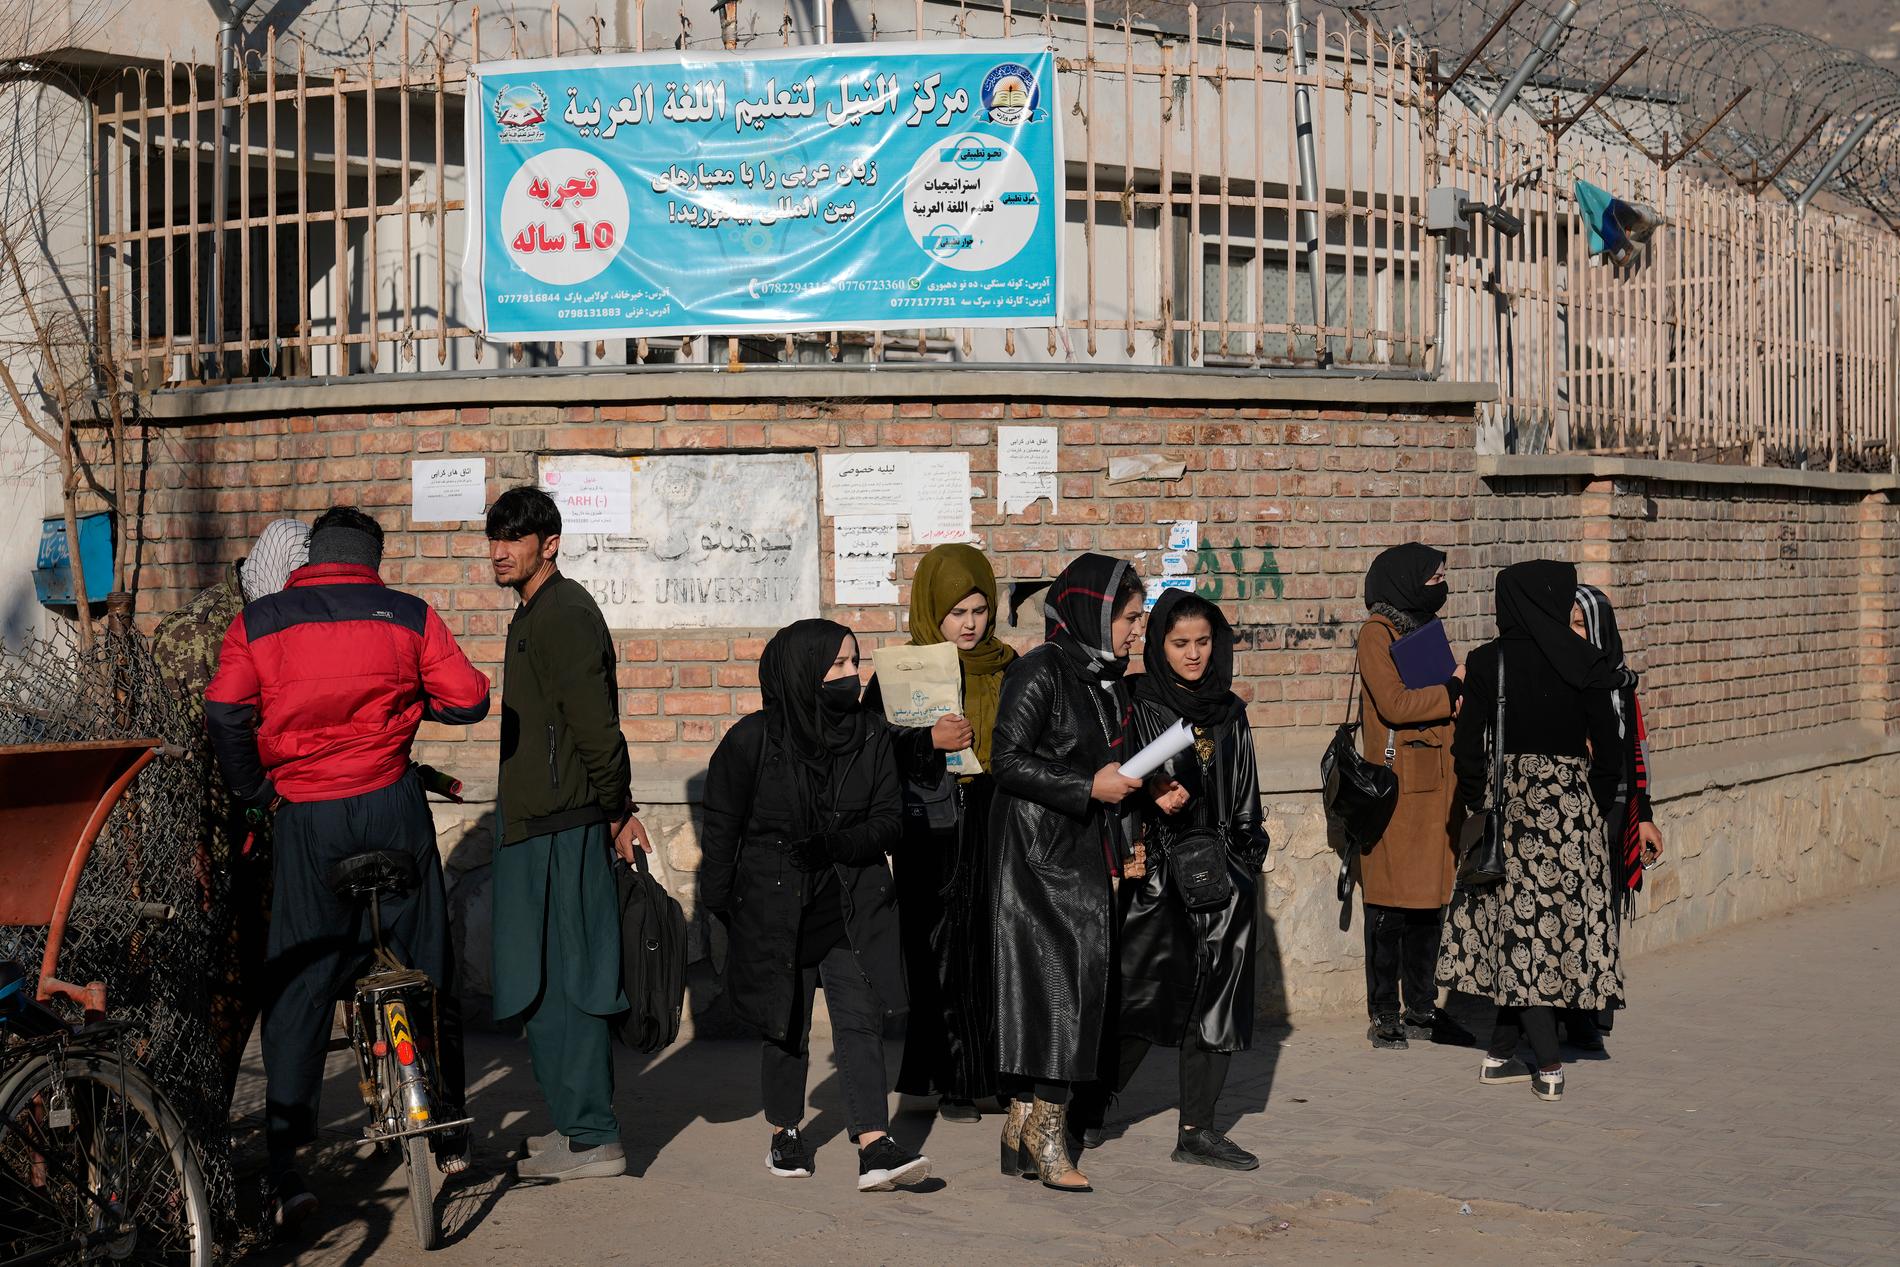 Armed guards stop female students in Kabul